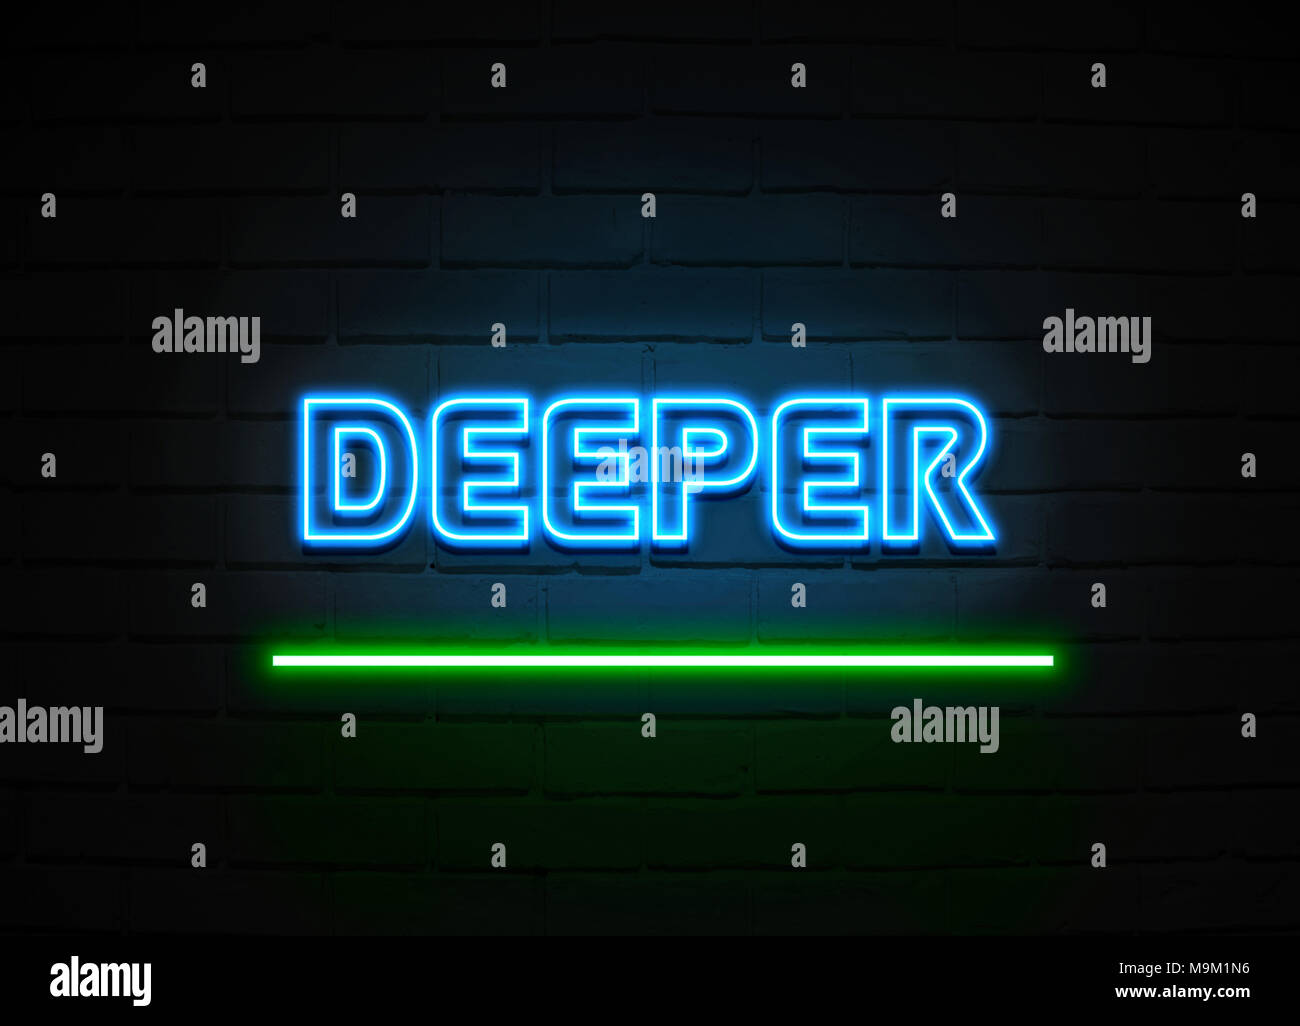 Deeper neon sign - Glowing Neon Sign on brickwall wall - 3D rendered royalty free stock illustration. Stock Photo